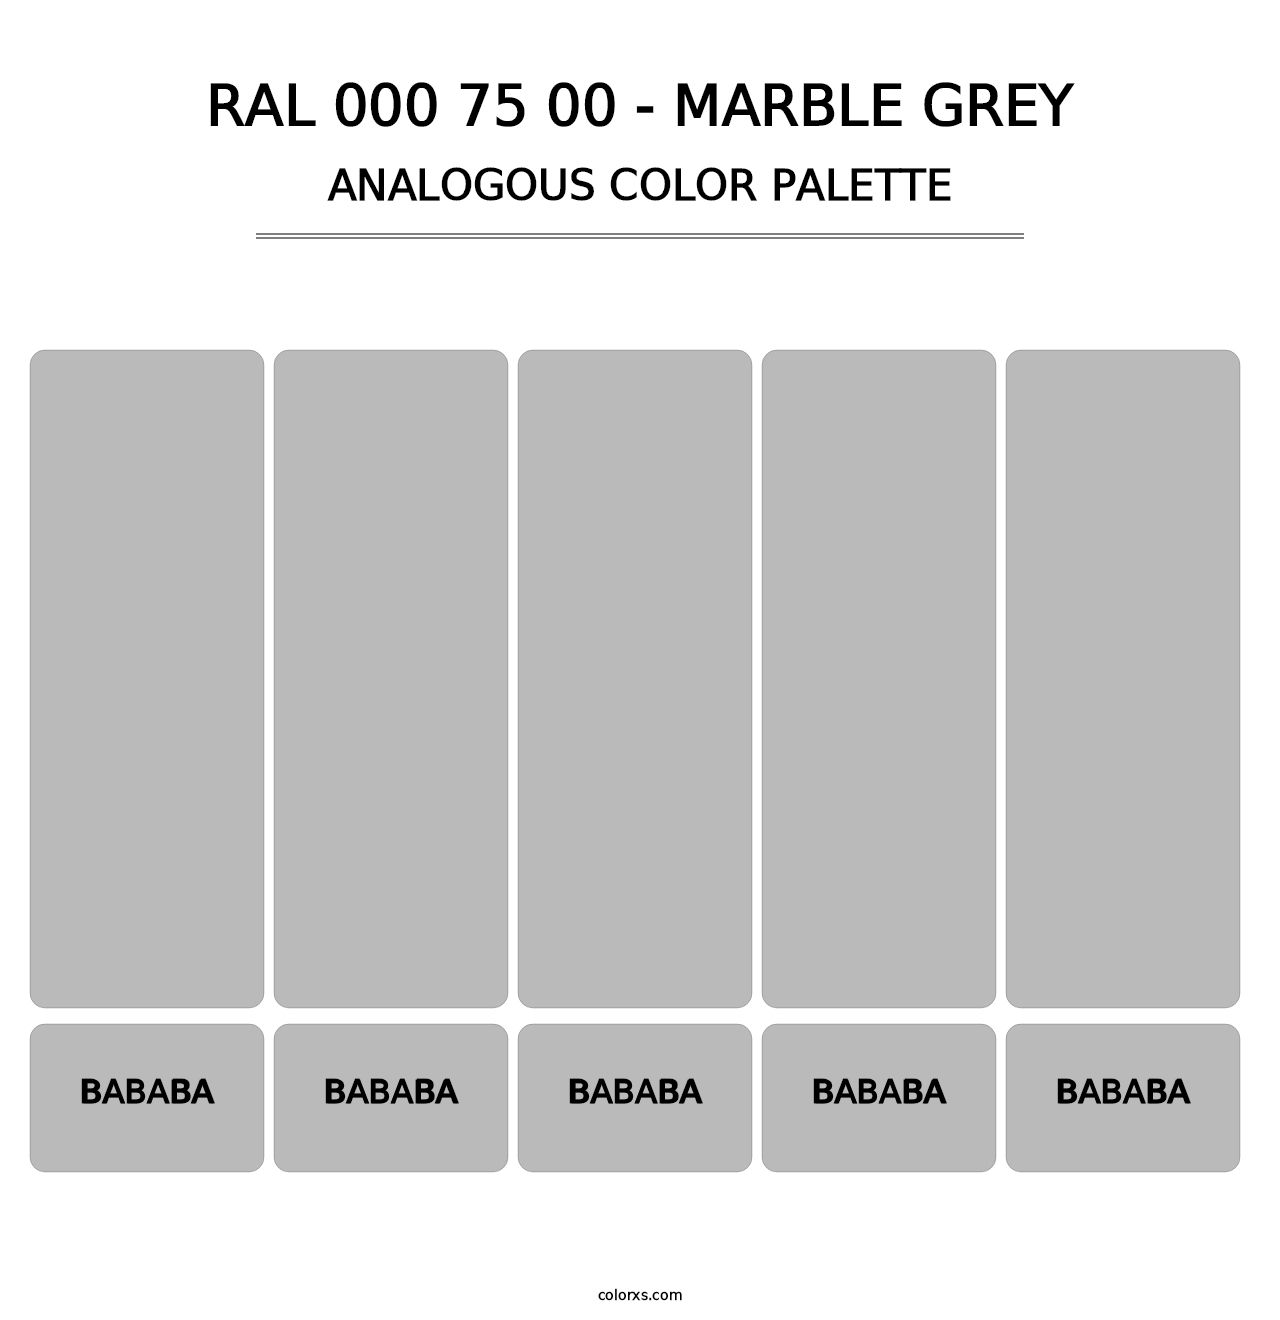 RAL 000 75 00 - Marble Grey - Analogous Color Palette